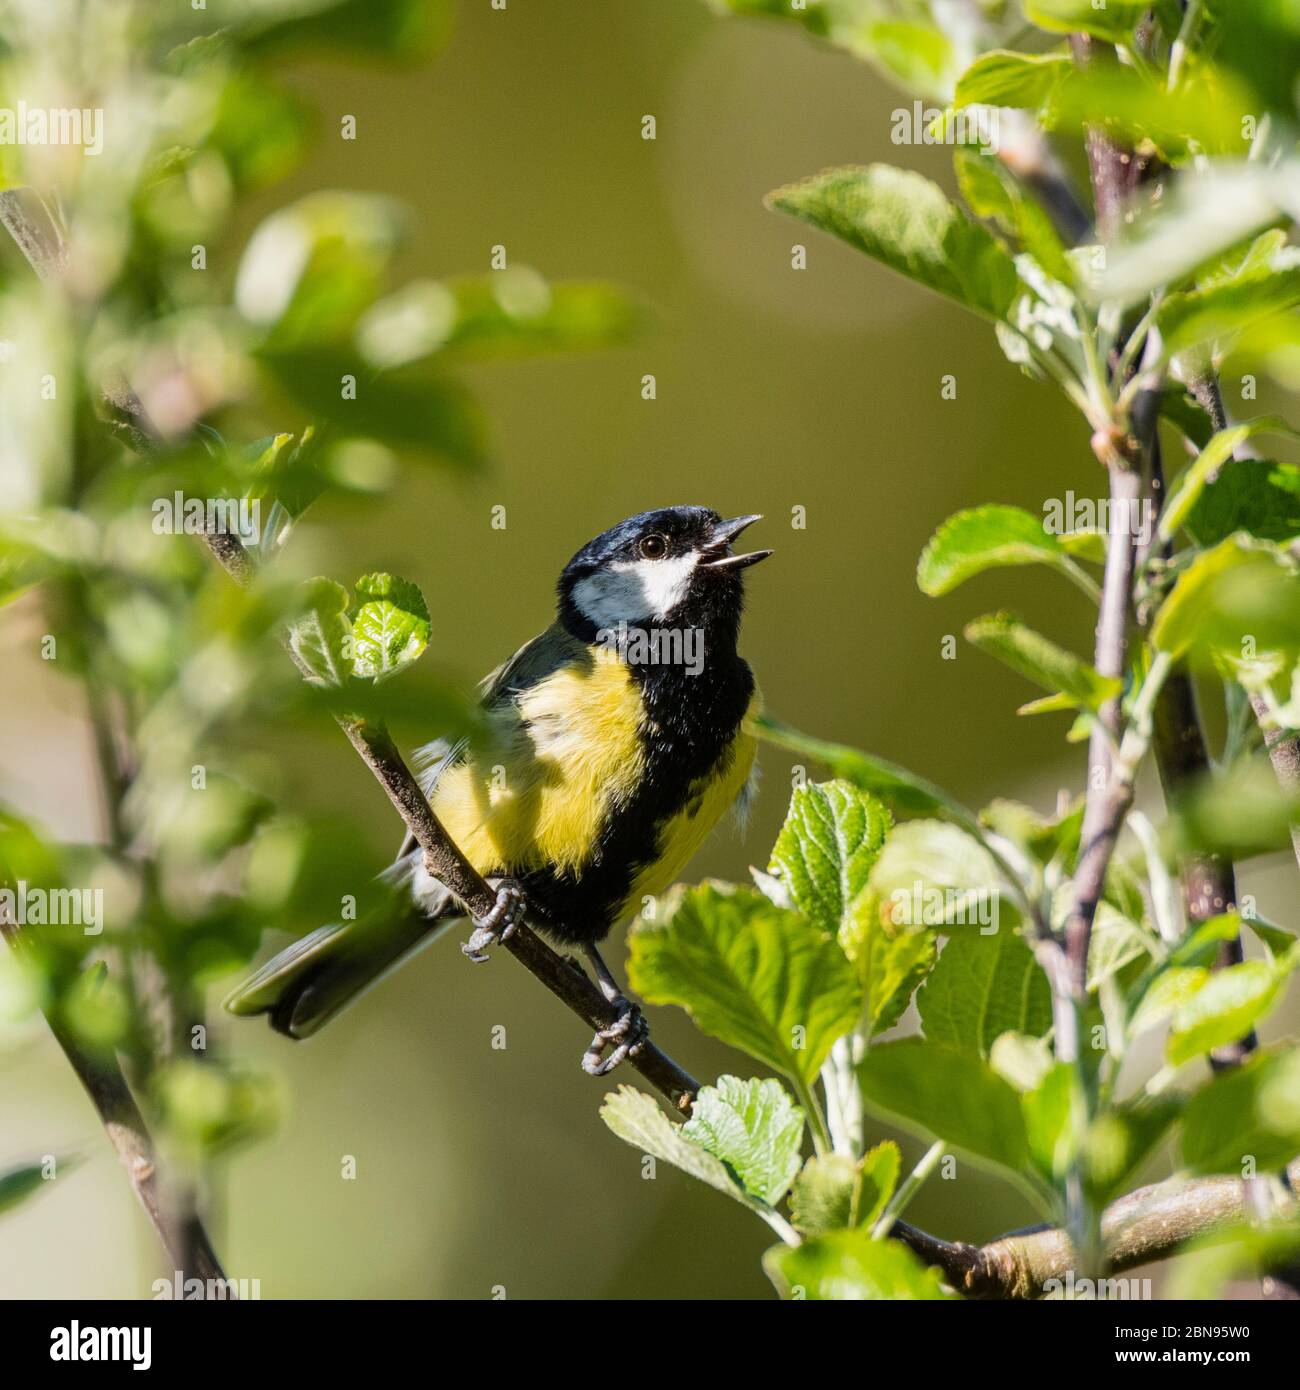 A Great Tit (Parus major) singing in the Uk Stock Photo